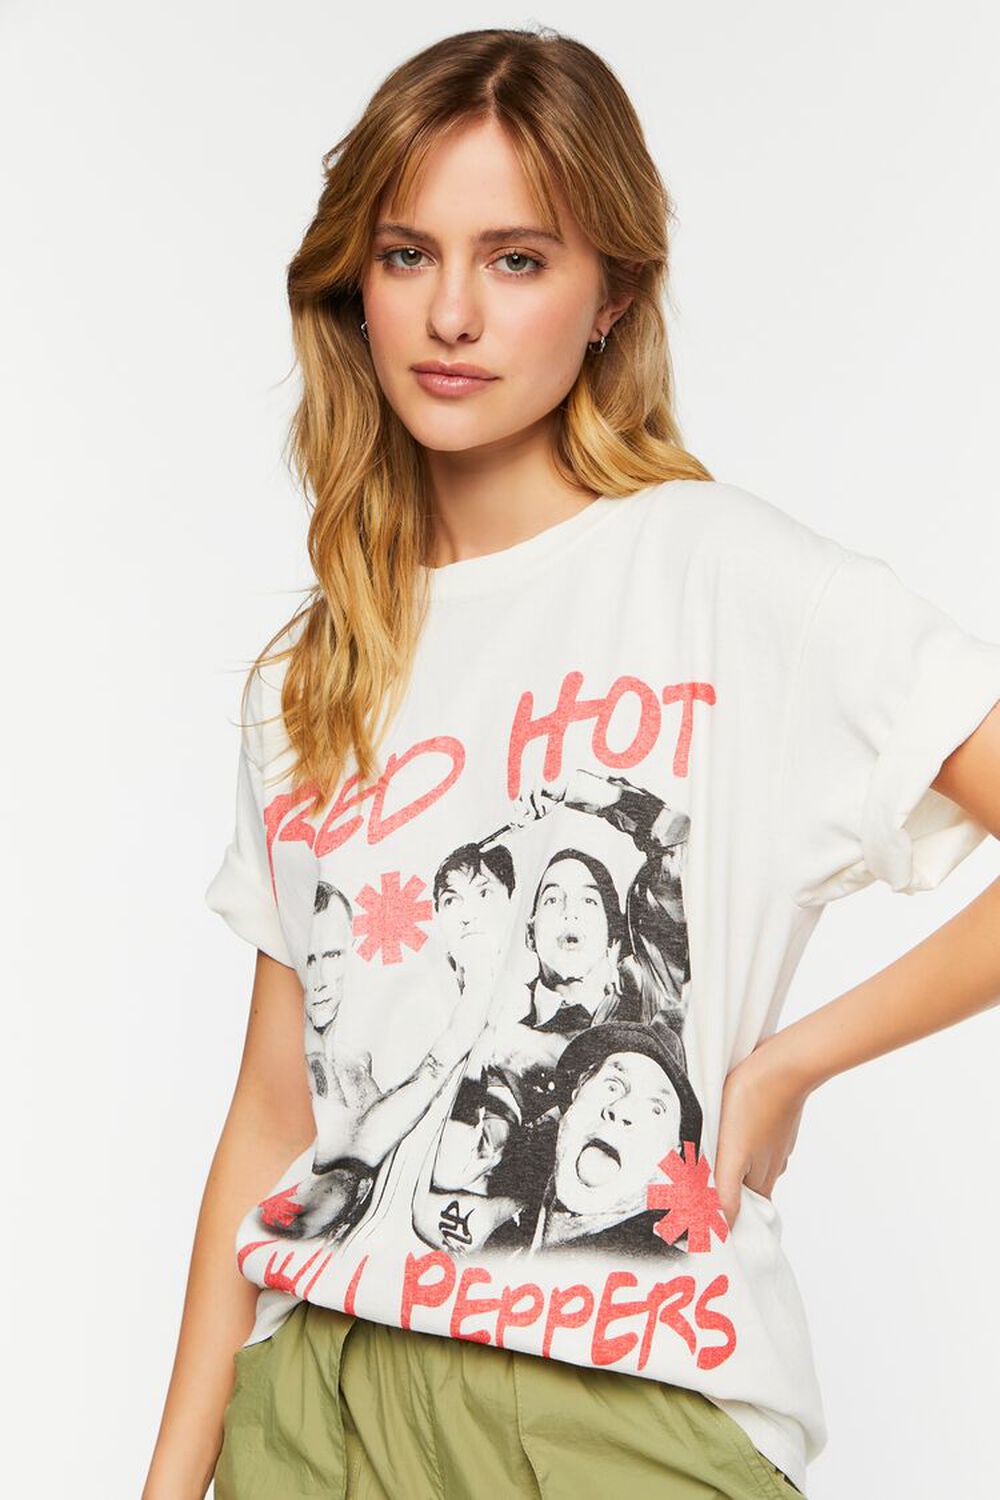 Forretningsmand assistent dok Red Hot Chili Peppers Graphic Tee